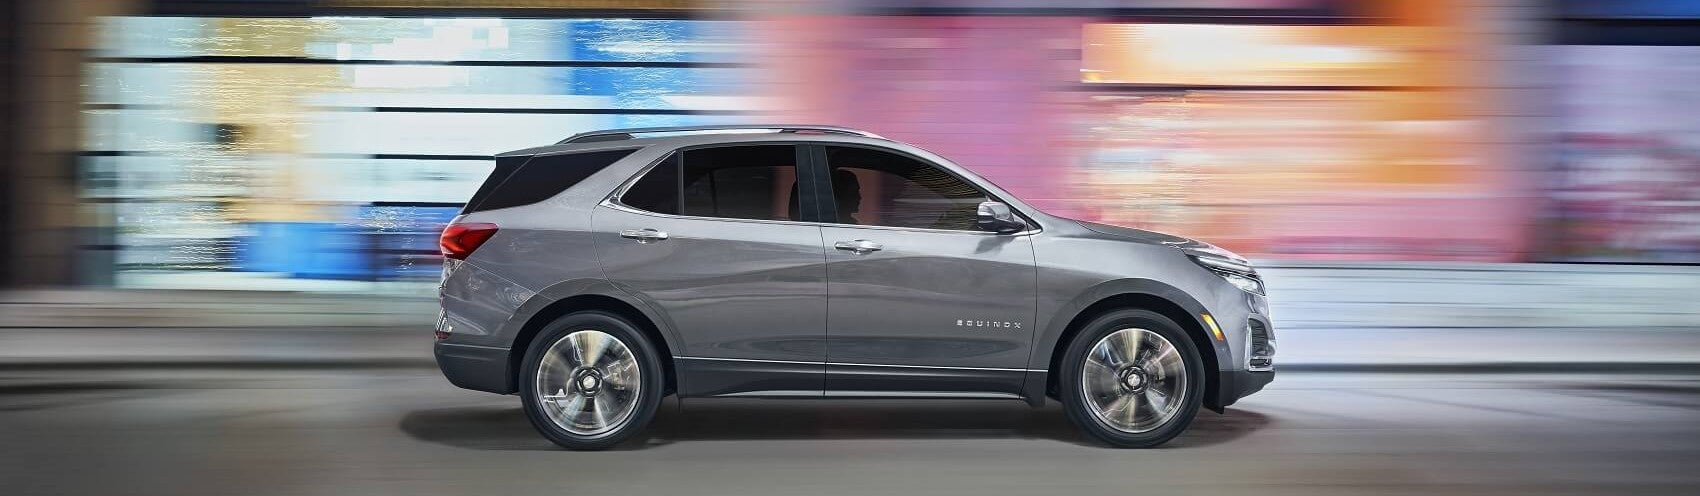 Chevy Equinox for Sale Waterford Township MI